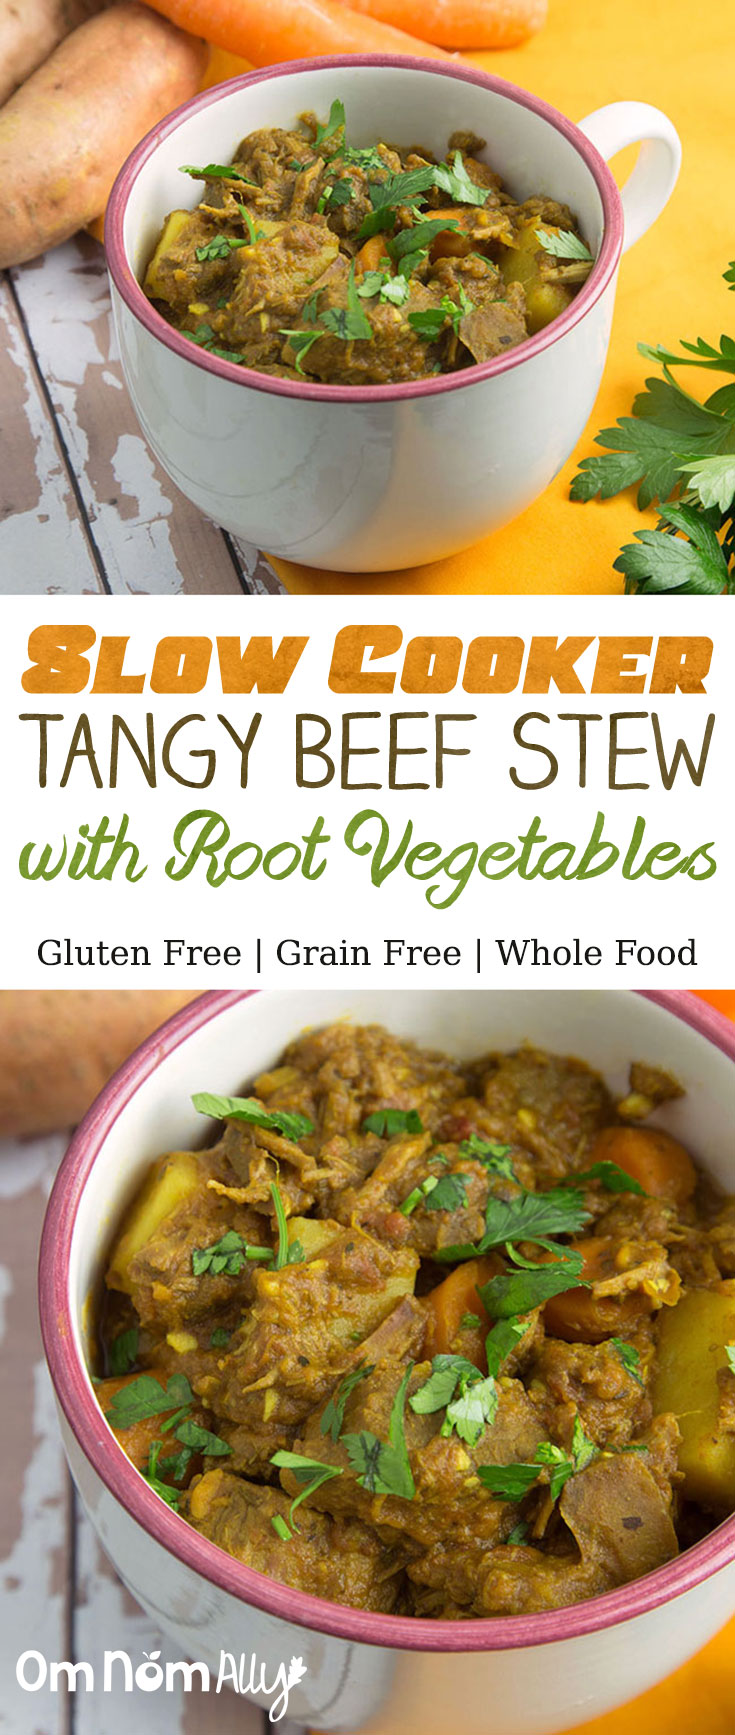 Slow Cooker Tangy Beef Stew with Root Veg | @OmNomAlly